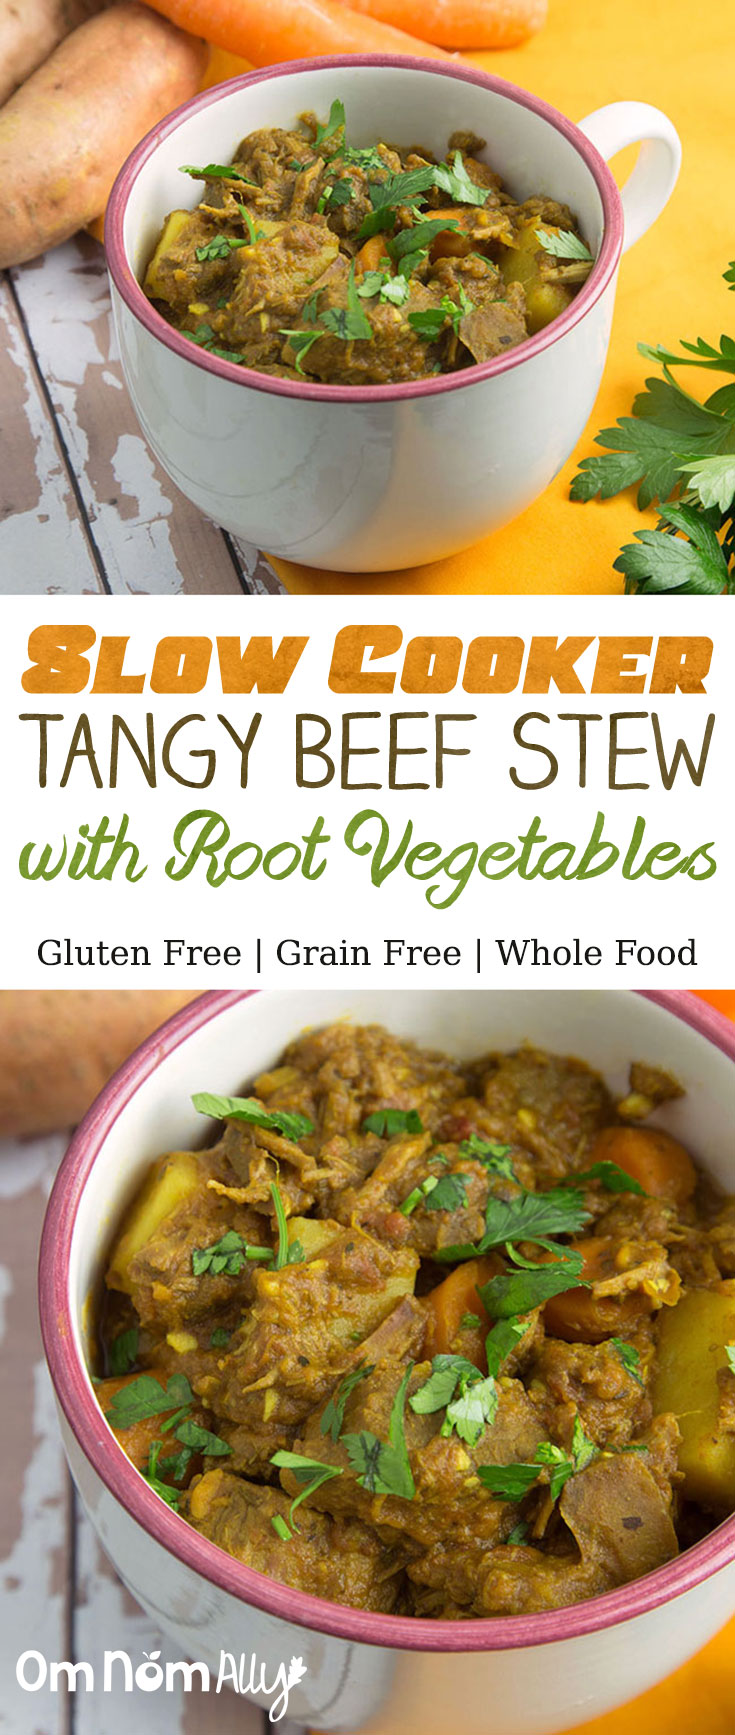 Slow Cooker Tangy Beef Stew with Root Veg | @OmNomAlly